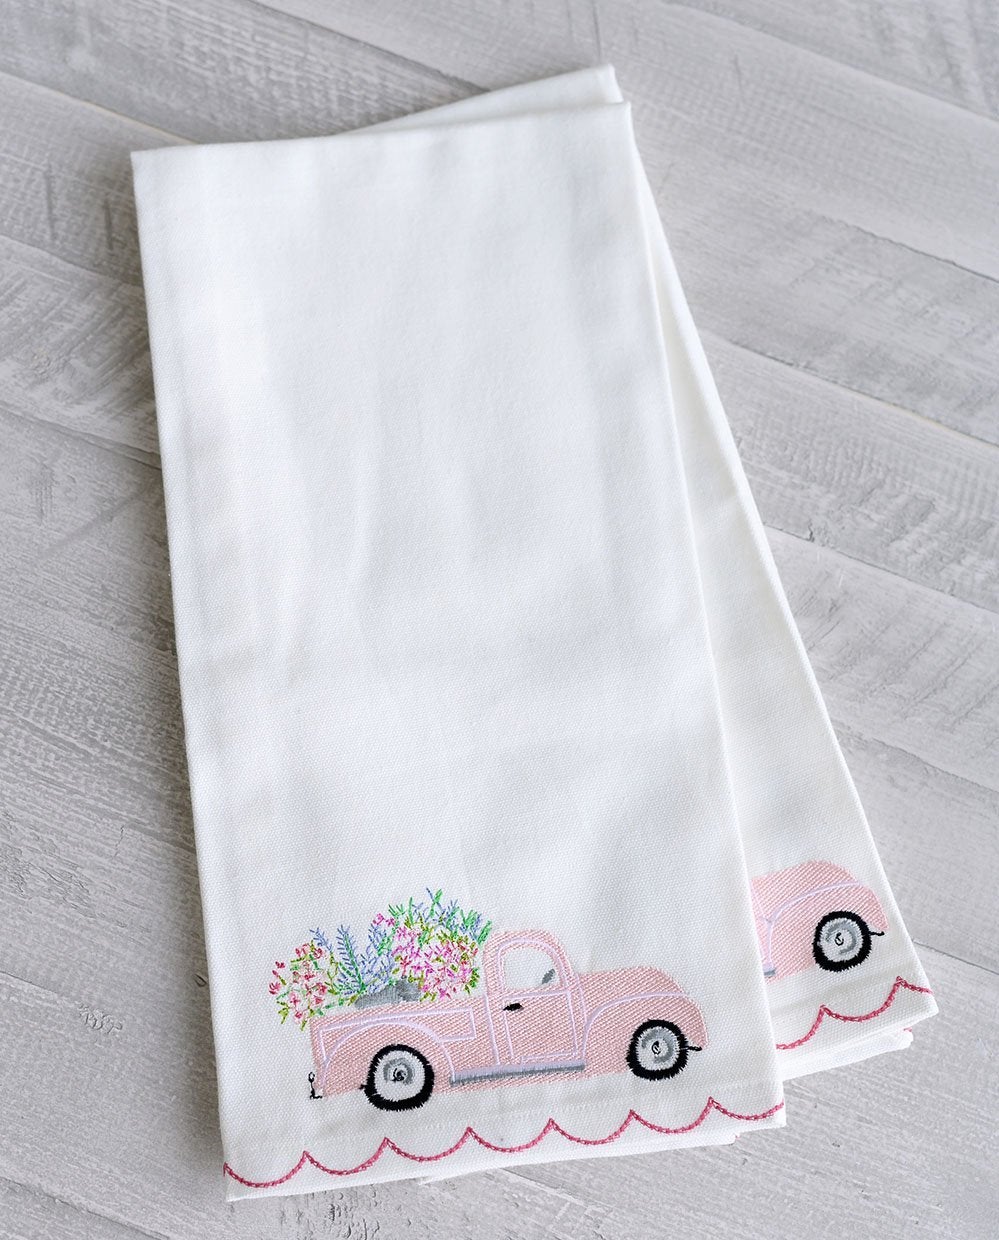 Floral Kitchen Tea Towel, Cute Dish Towel, Always Made With Love, Kitc –  BrightKind Creative